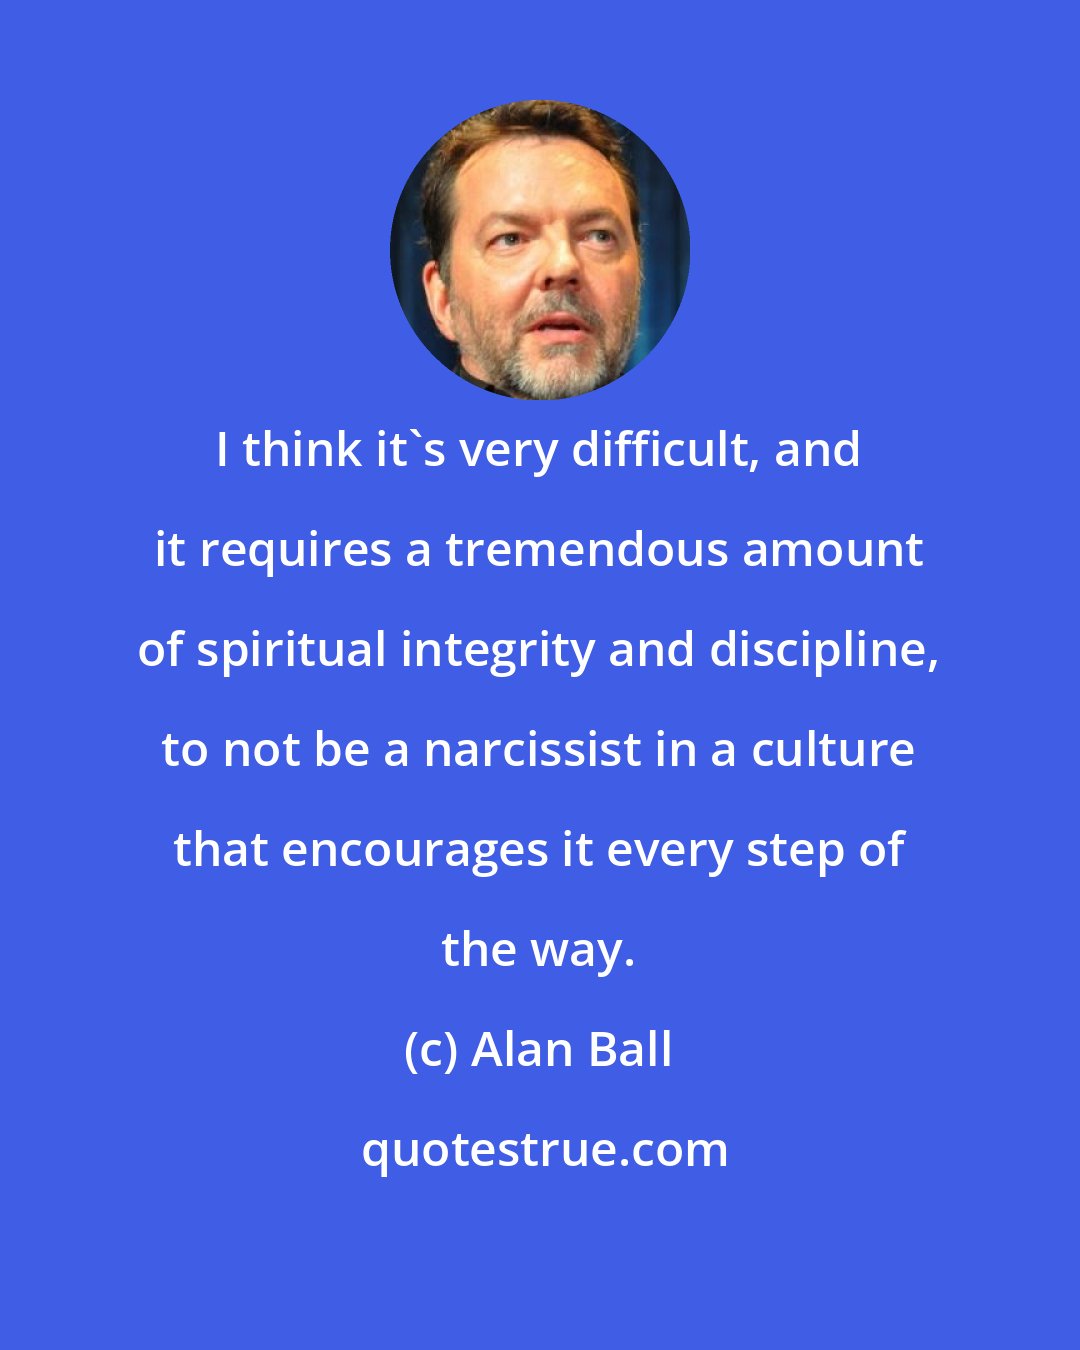 Alan Ball: I think it's very difficult, and it requires a tremendous amount of spiritual integrity and discipline, to not be a narcissist in a culture that encourages it every step of the way.